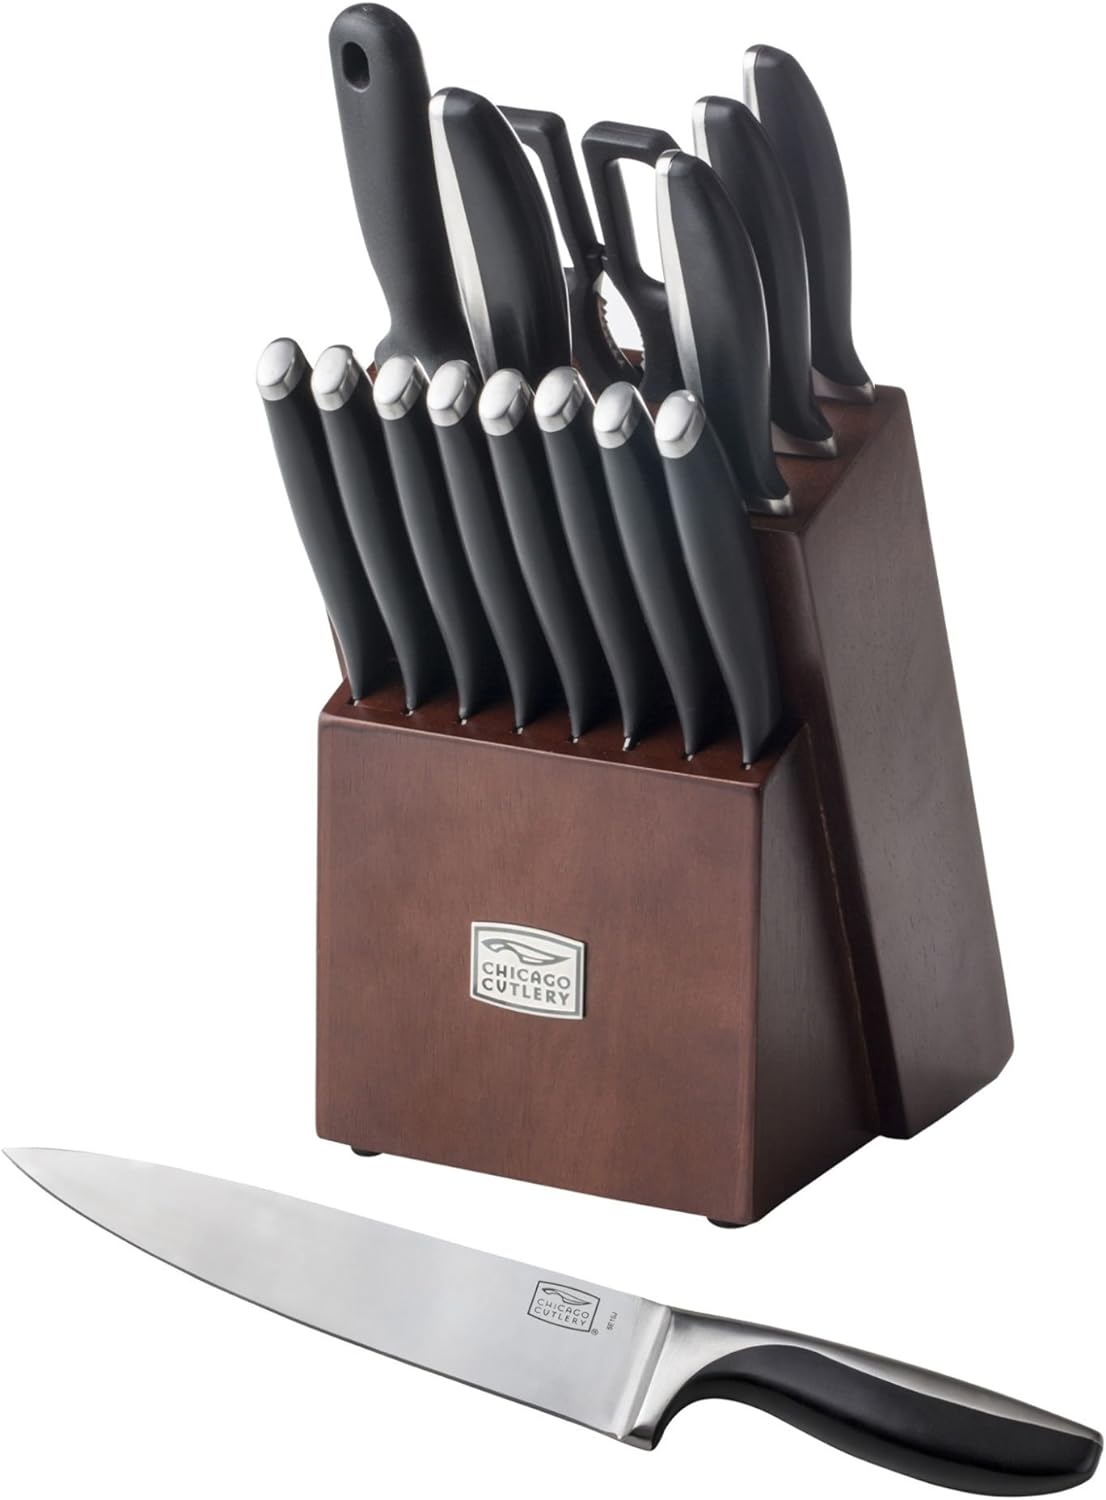 Chicago Cutlery 16 Piece Avondale Knife Block Set Review